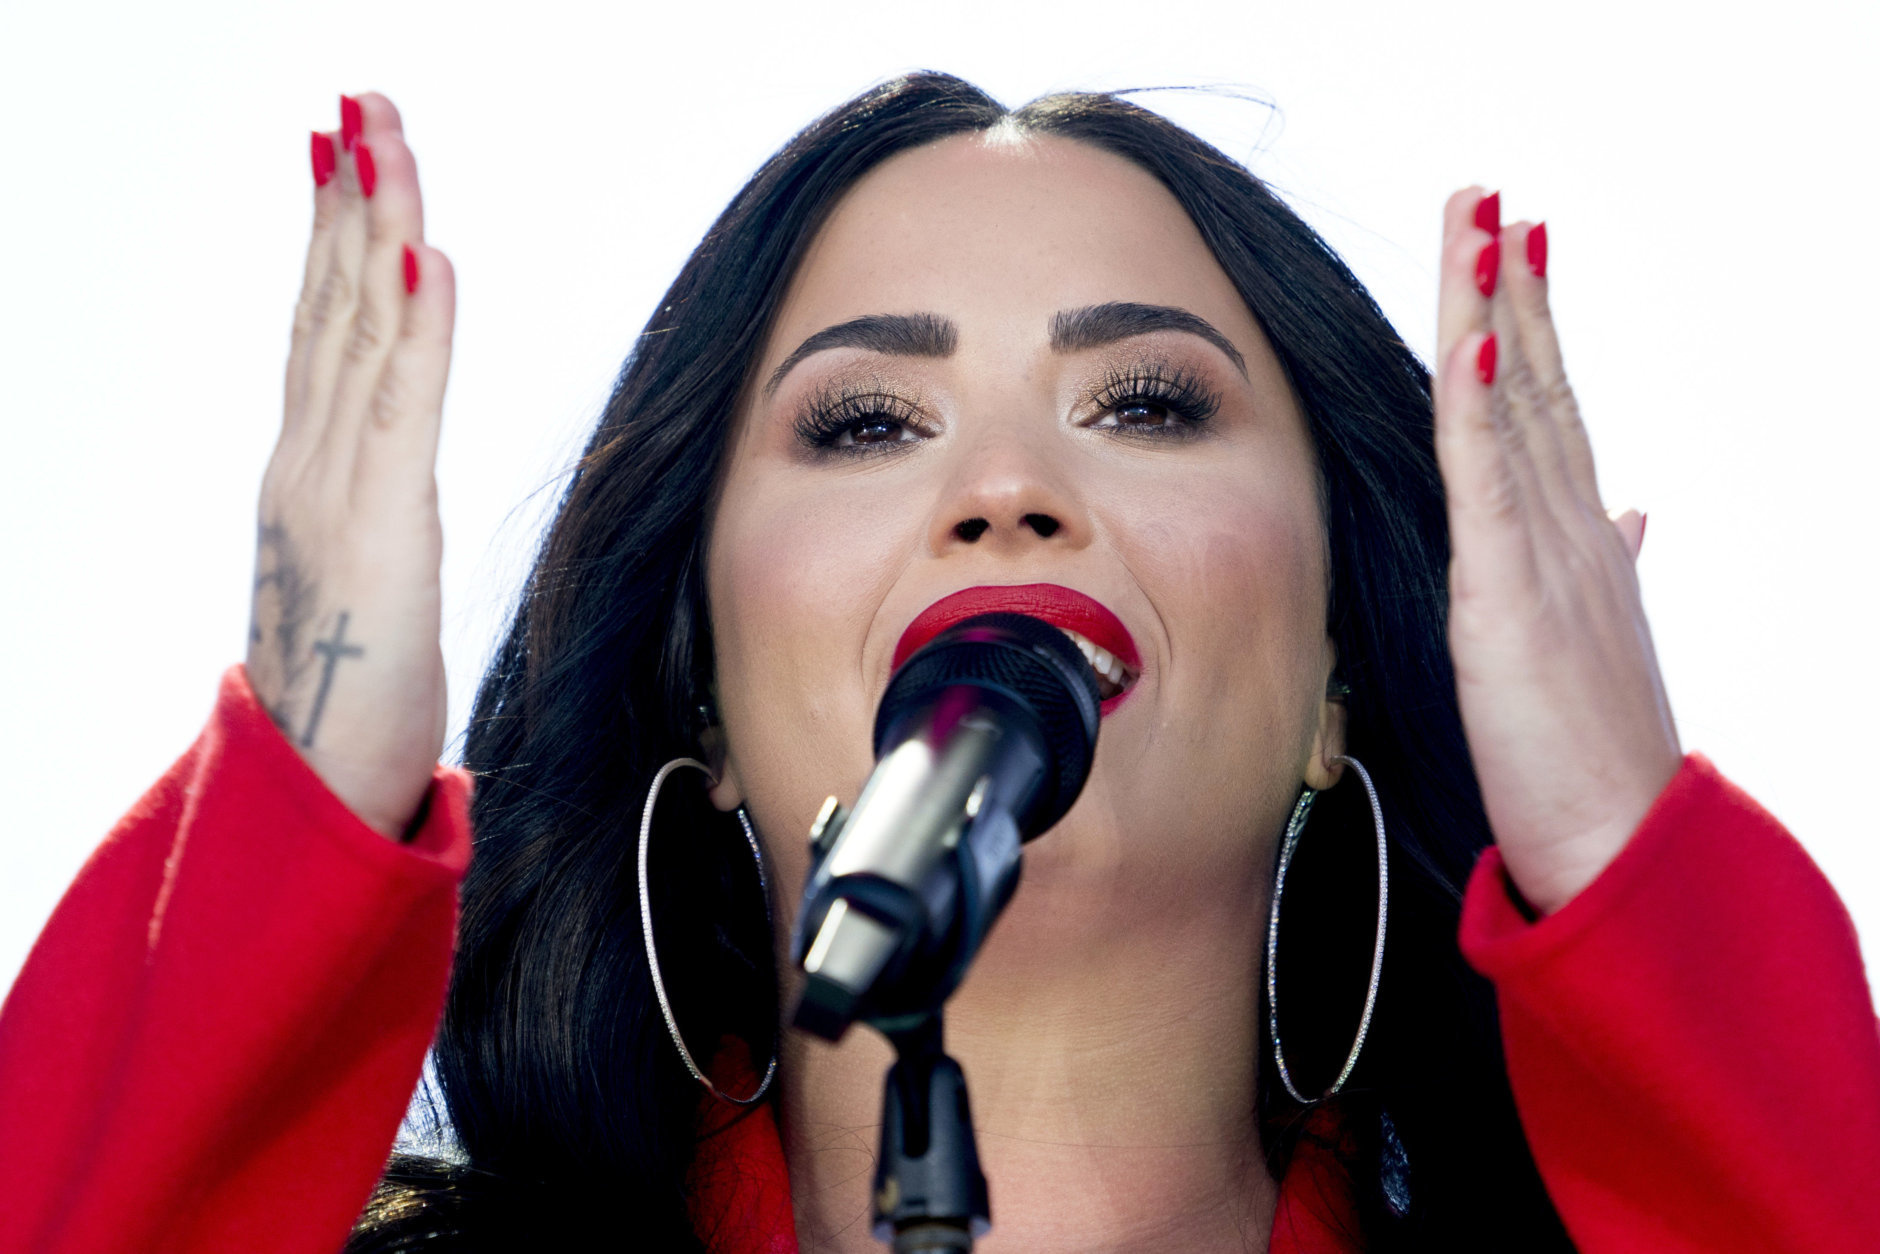 Demi Lovato performs "Skyscraper" during the "March for Our Lives" rally in support of gun control in Washington, Saturday, March 24, 2018. (AP Photo/Andrew Harnik)